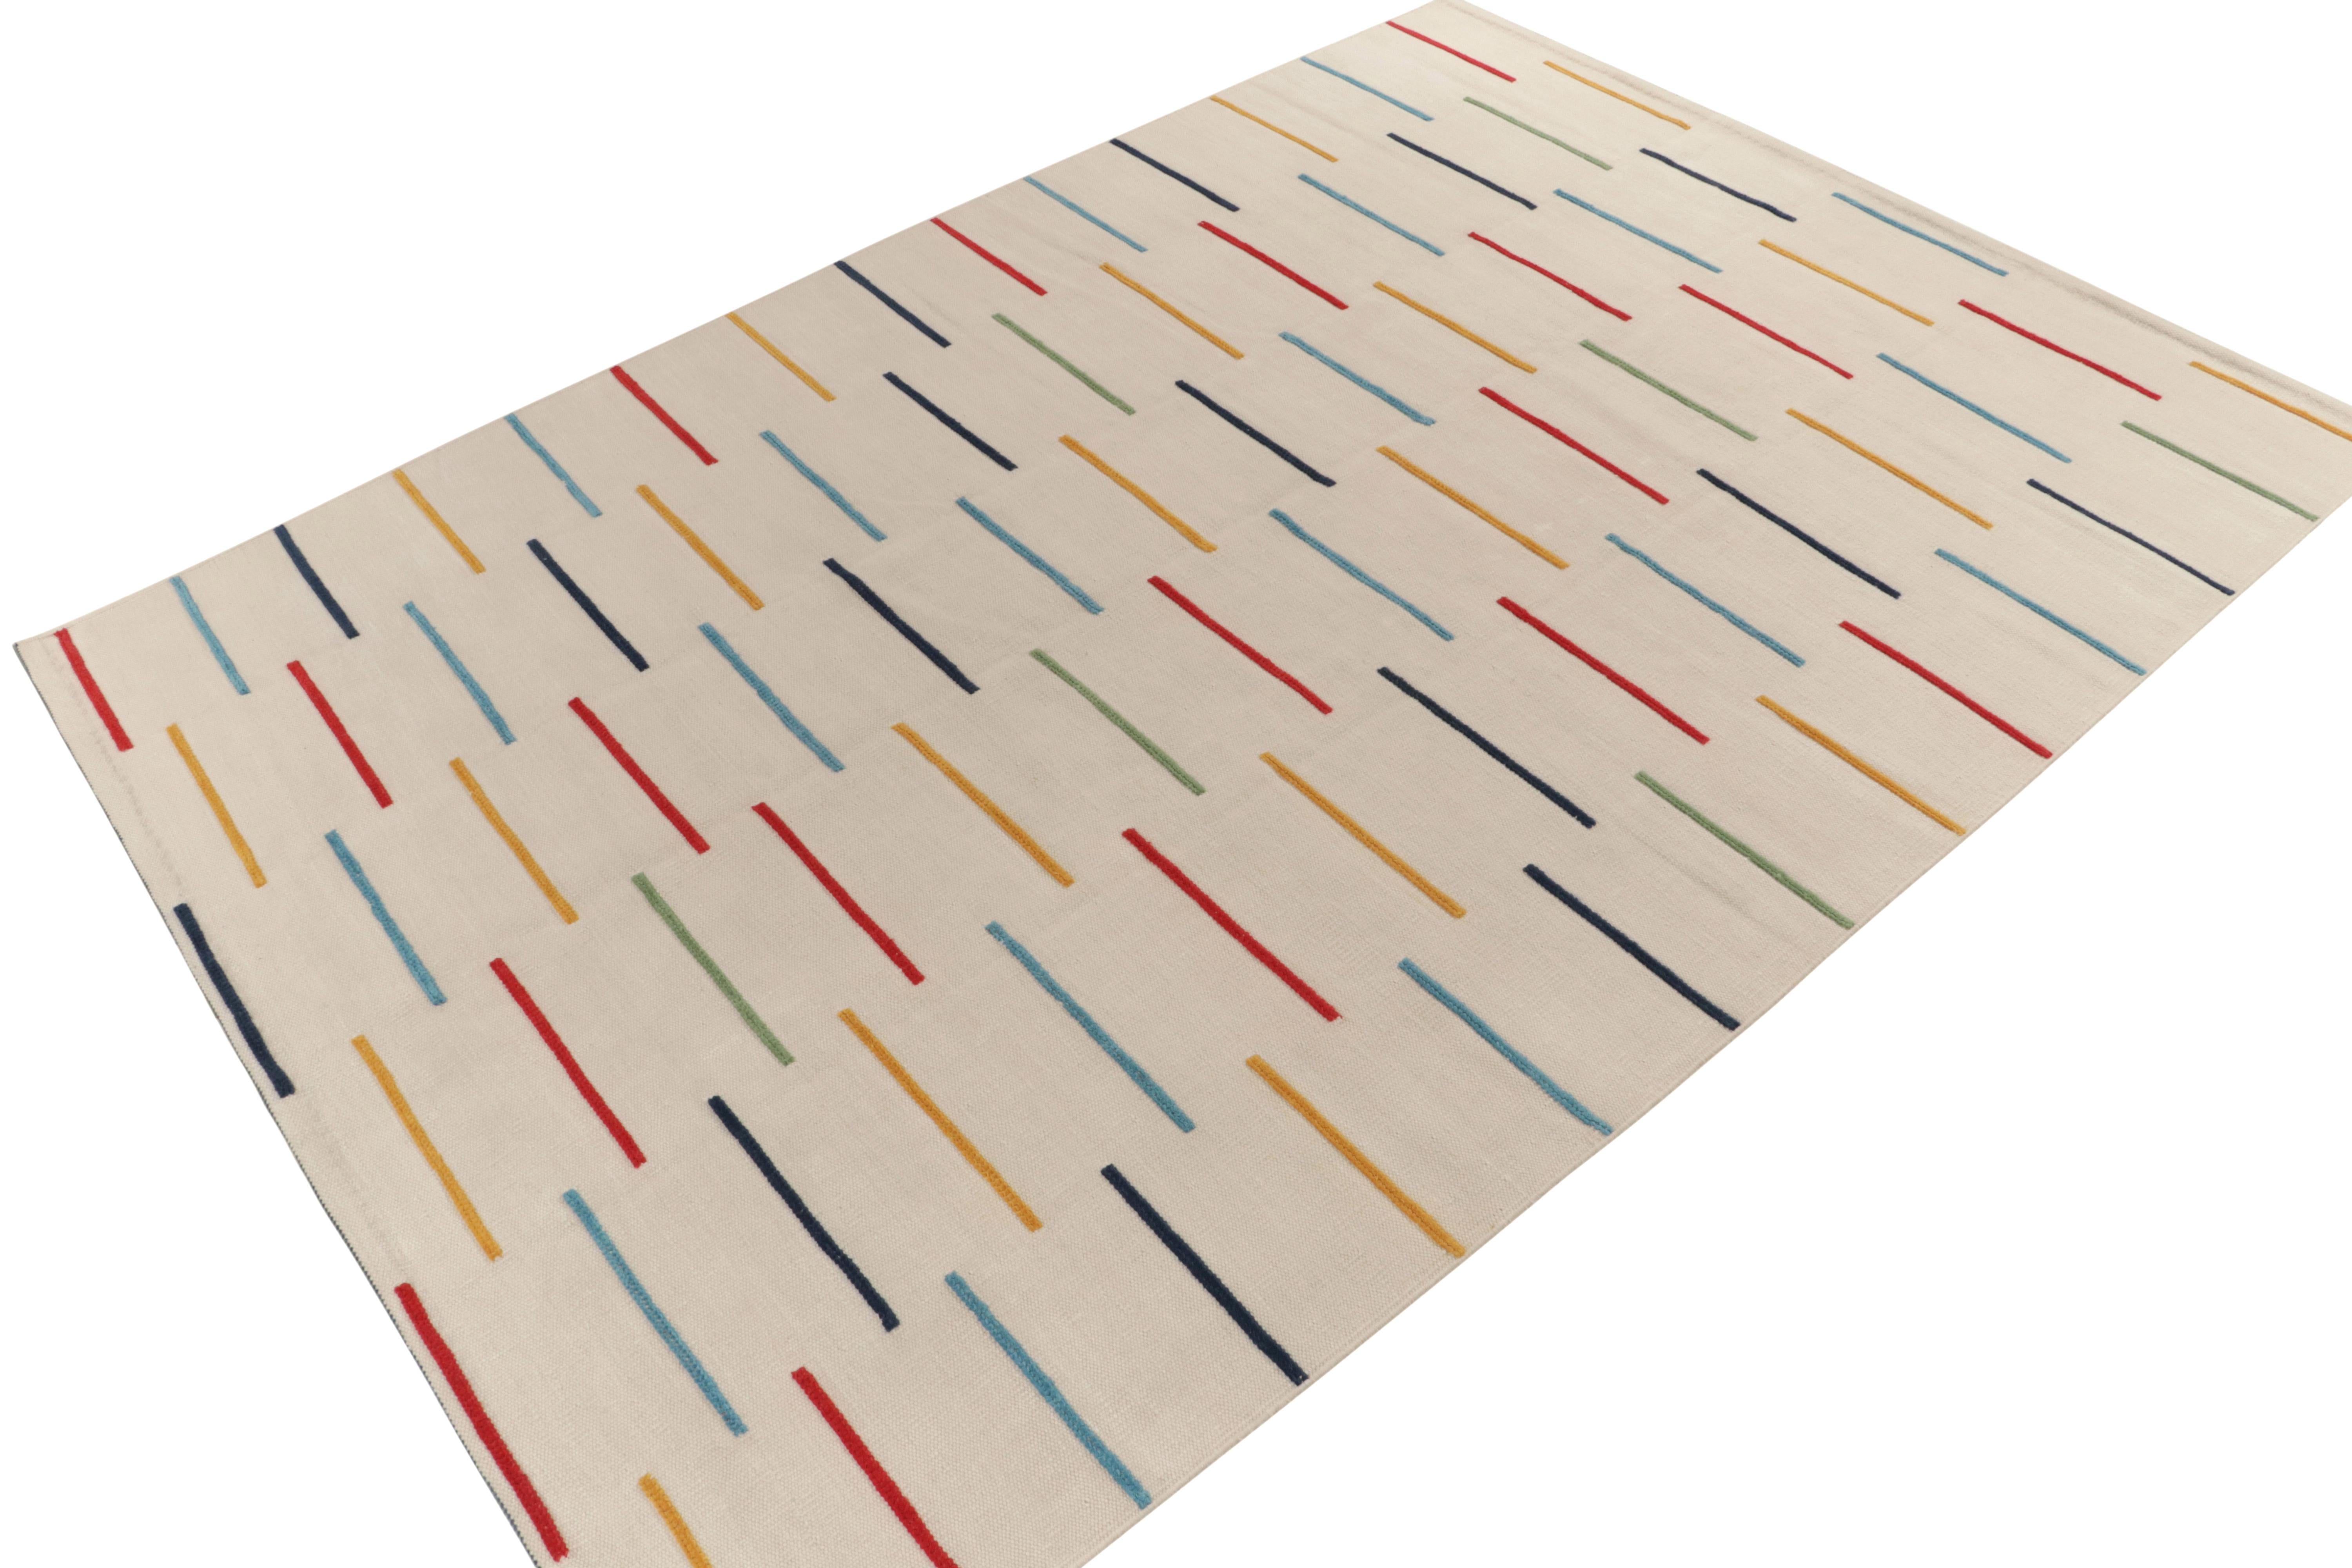 Rug & Kilim takes pride in presenting this 10x14 kilim design, inspired by a bold modern take on classic panel flat weaving. 

On the Design: This custom work features high-pile stripes in brightly colored blues, yellows, reds, and greens on the